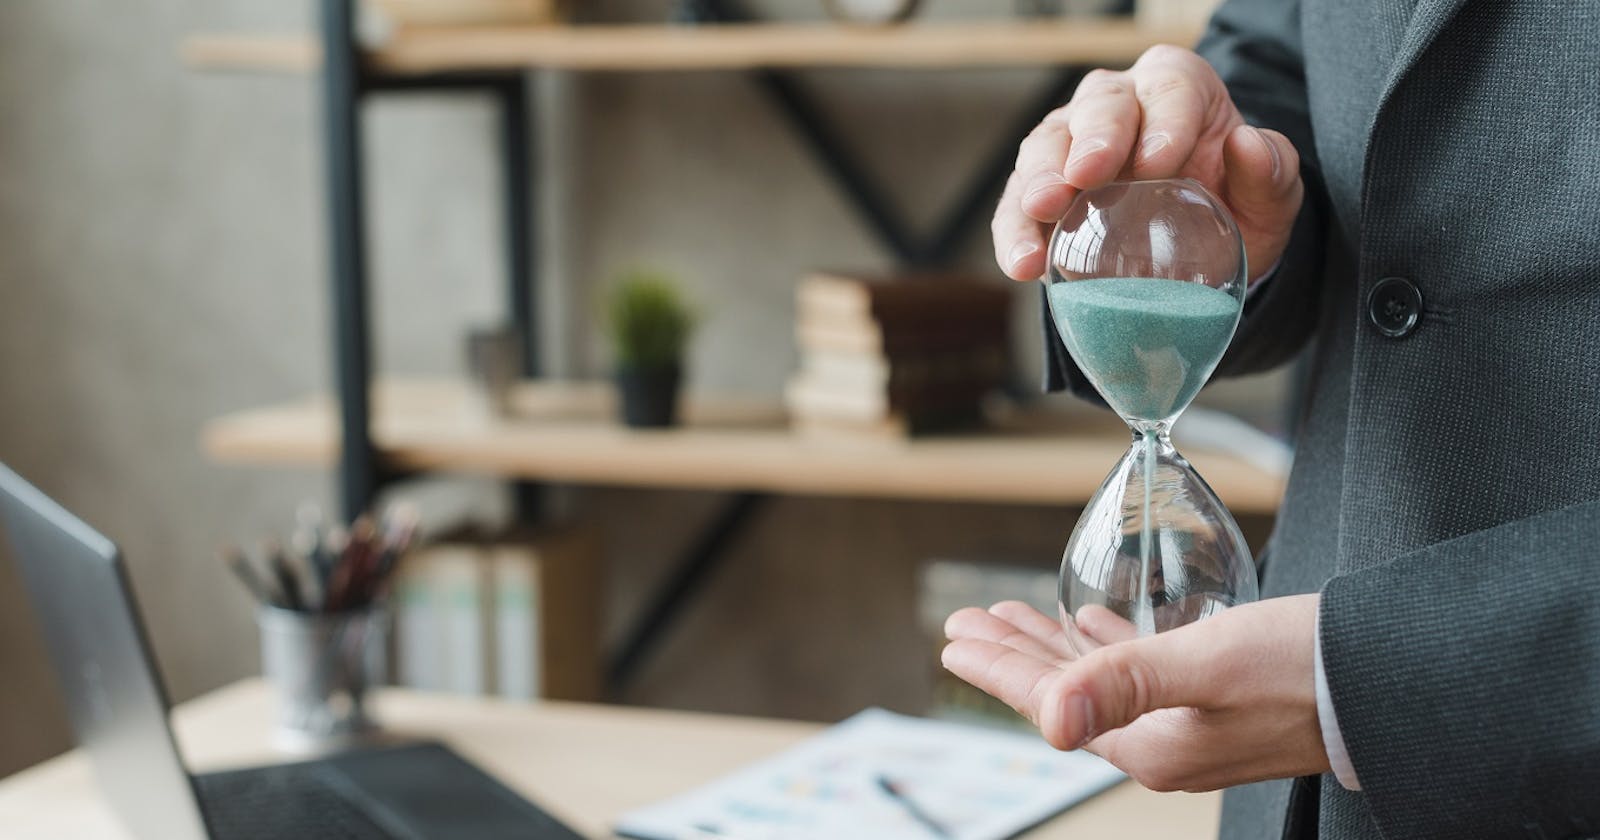 10 Tools That Will Help You Improve Your Time Management Skills